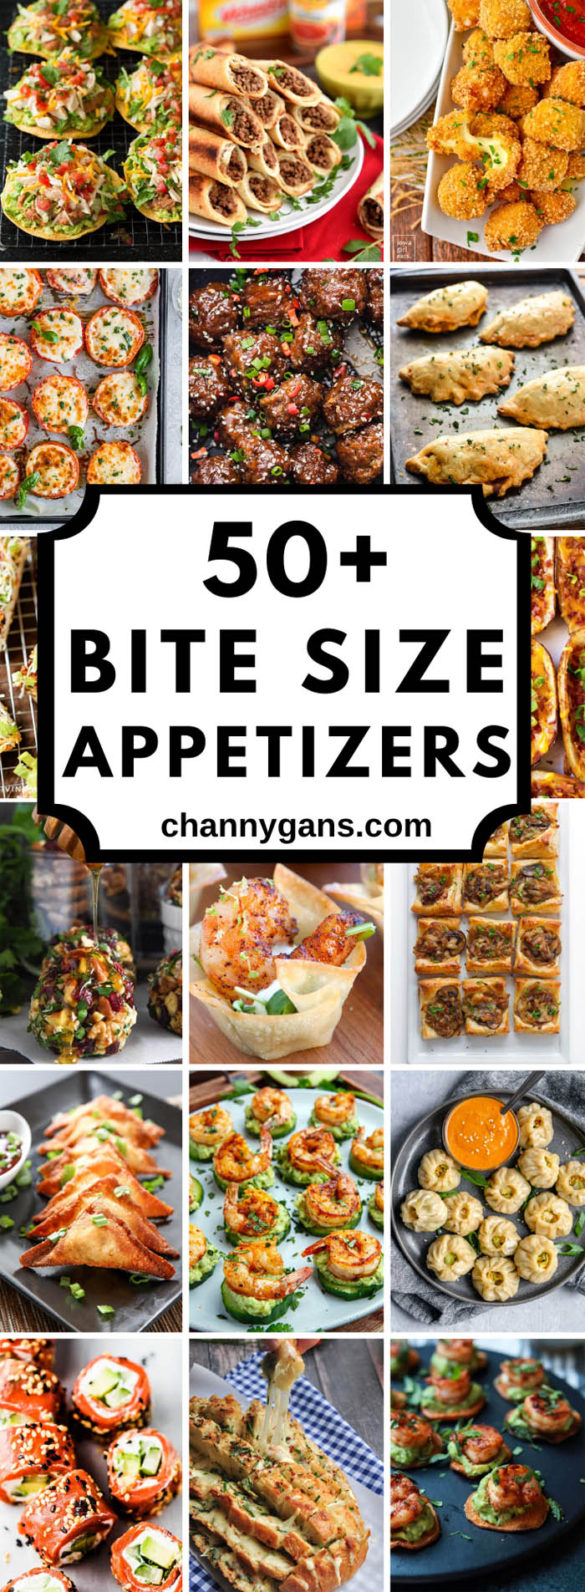 50+ Easy Bite Size Appetizers